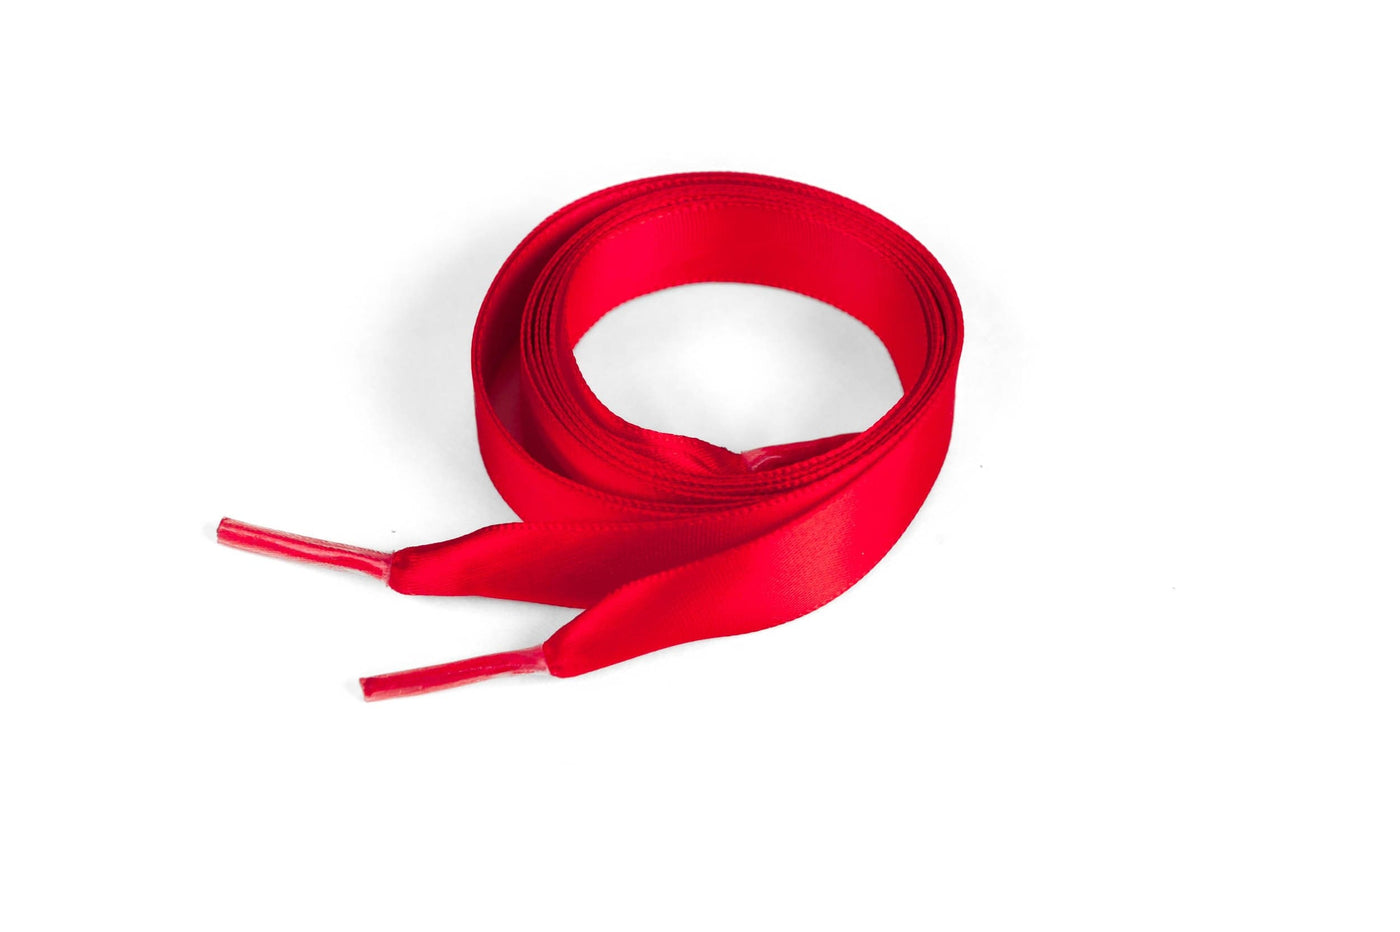 Satin Ribbon 5/8" Premium Quality Shoelaces - 72" Inch Length Red